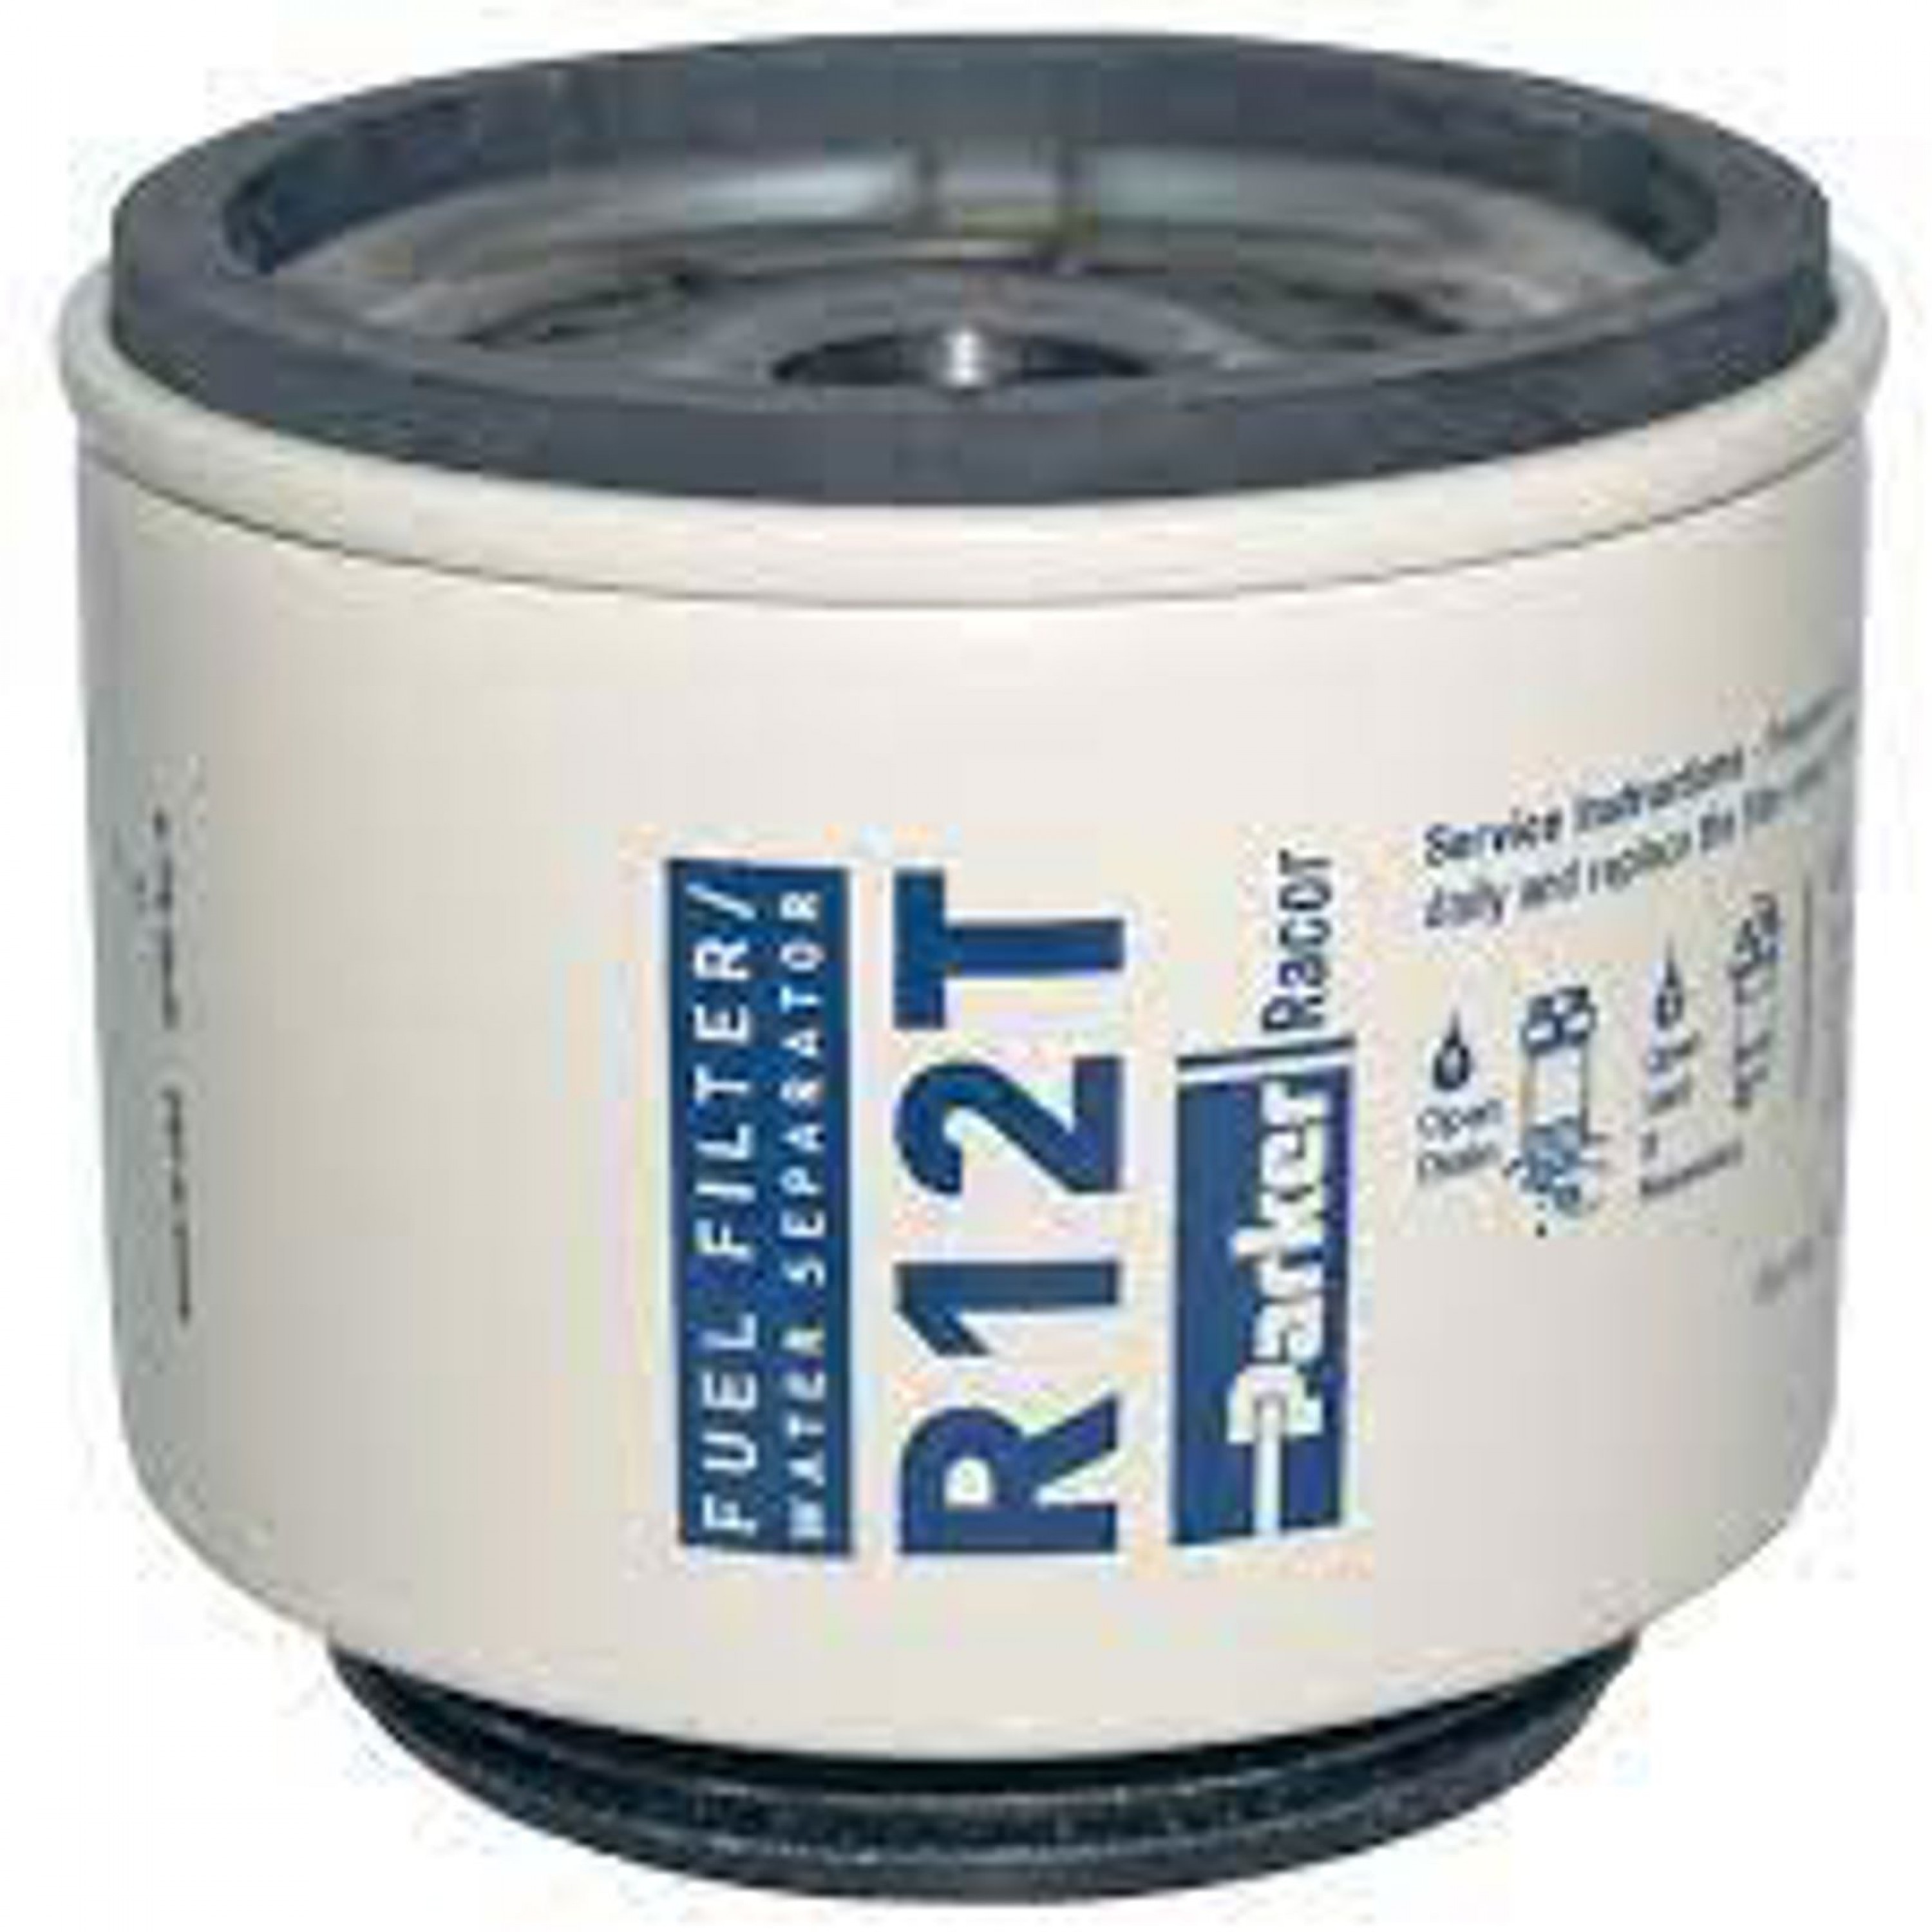 FILTER FUEL R120 RACOR ELEMENT 10 MICRON